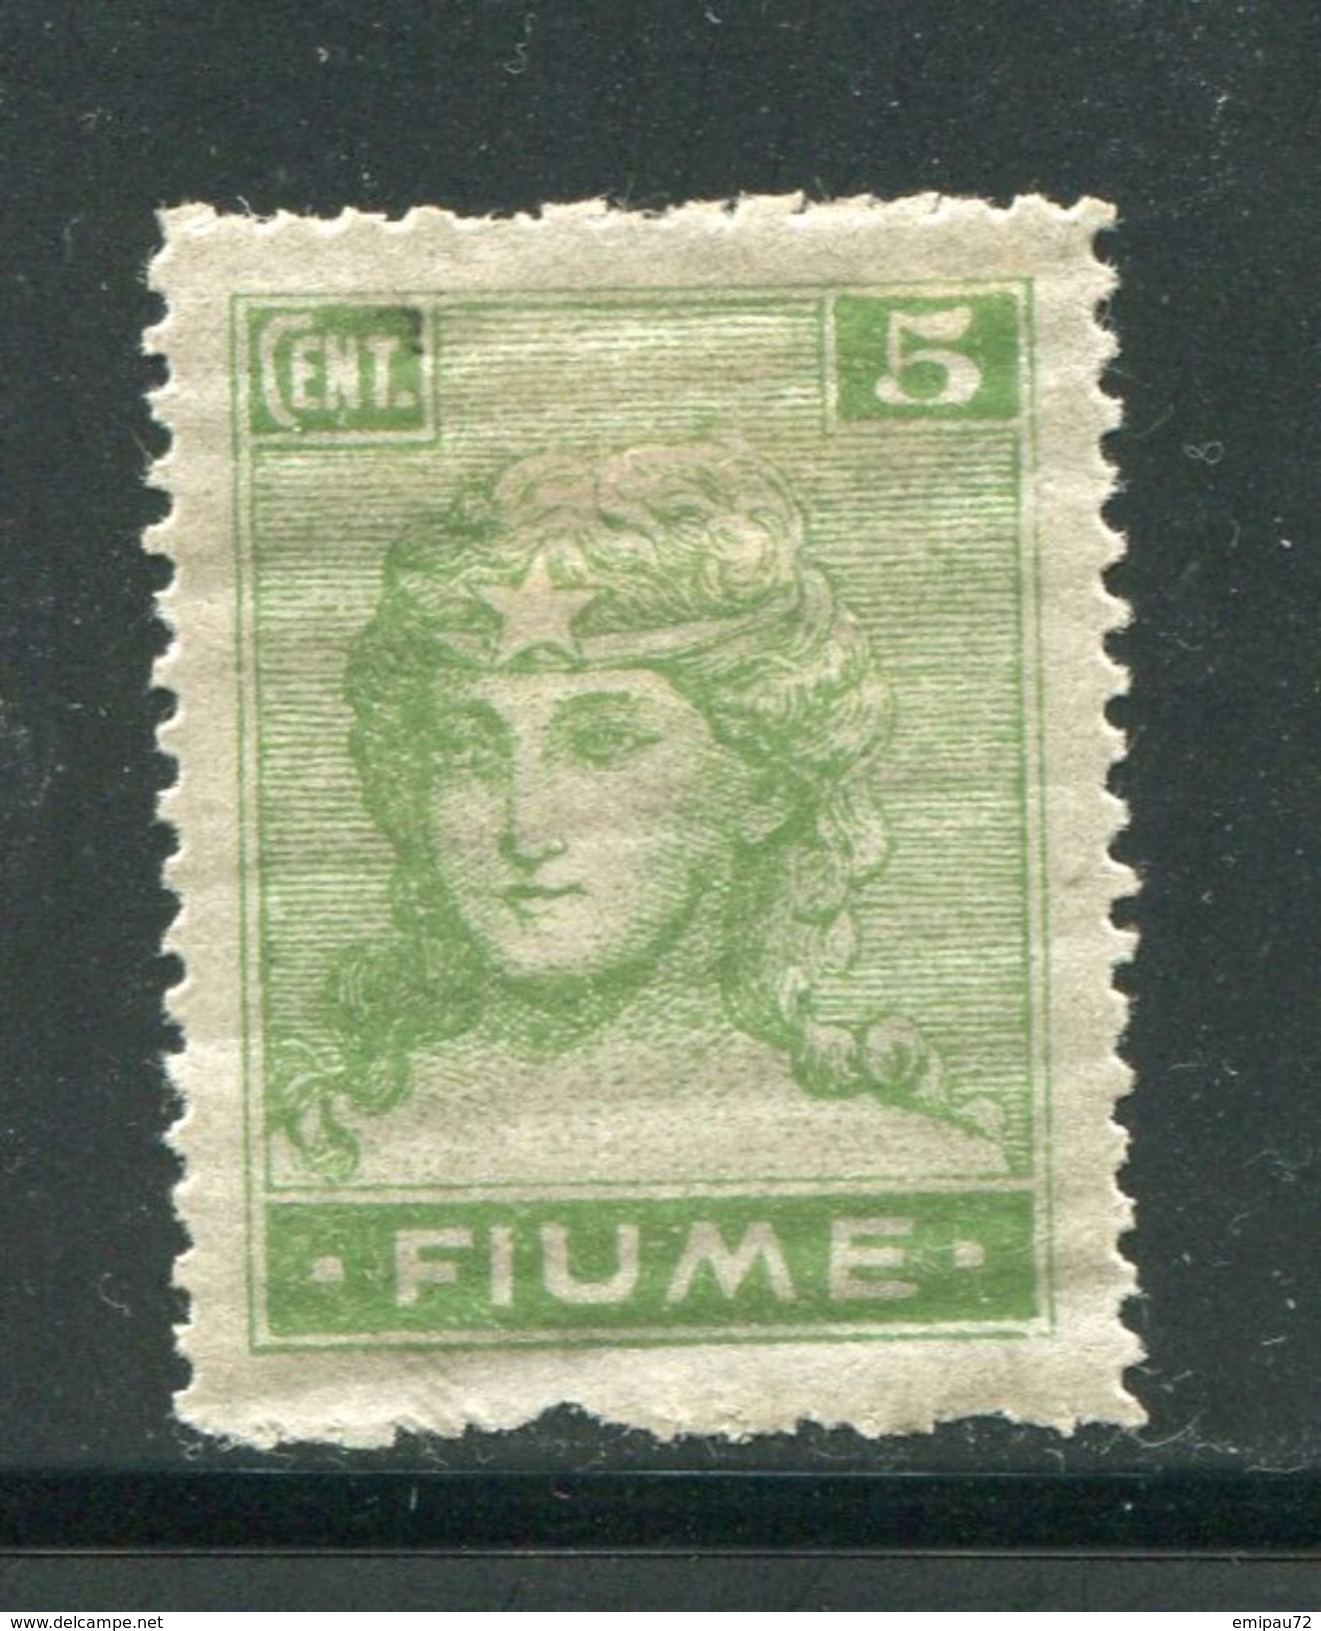 ITALIE- FIUME- Y&T N°34- Neuf Avec Charnière * - Occ. Yougoslave: Fiume